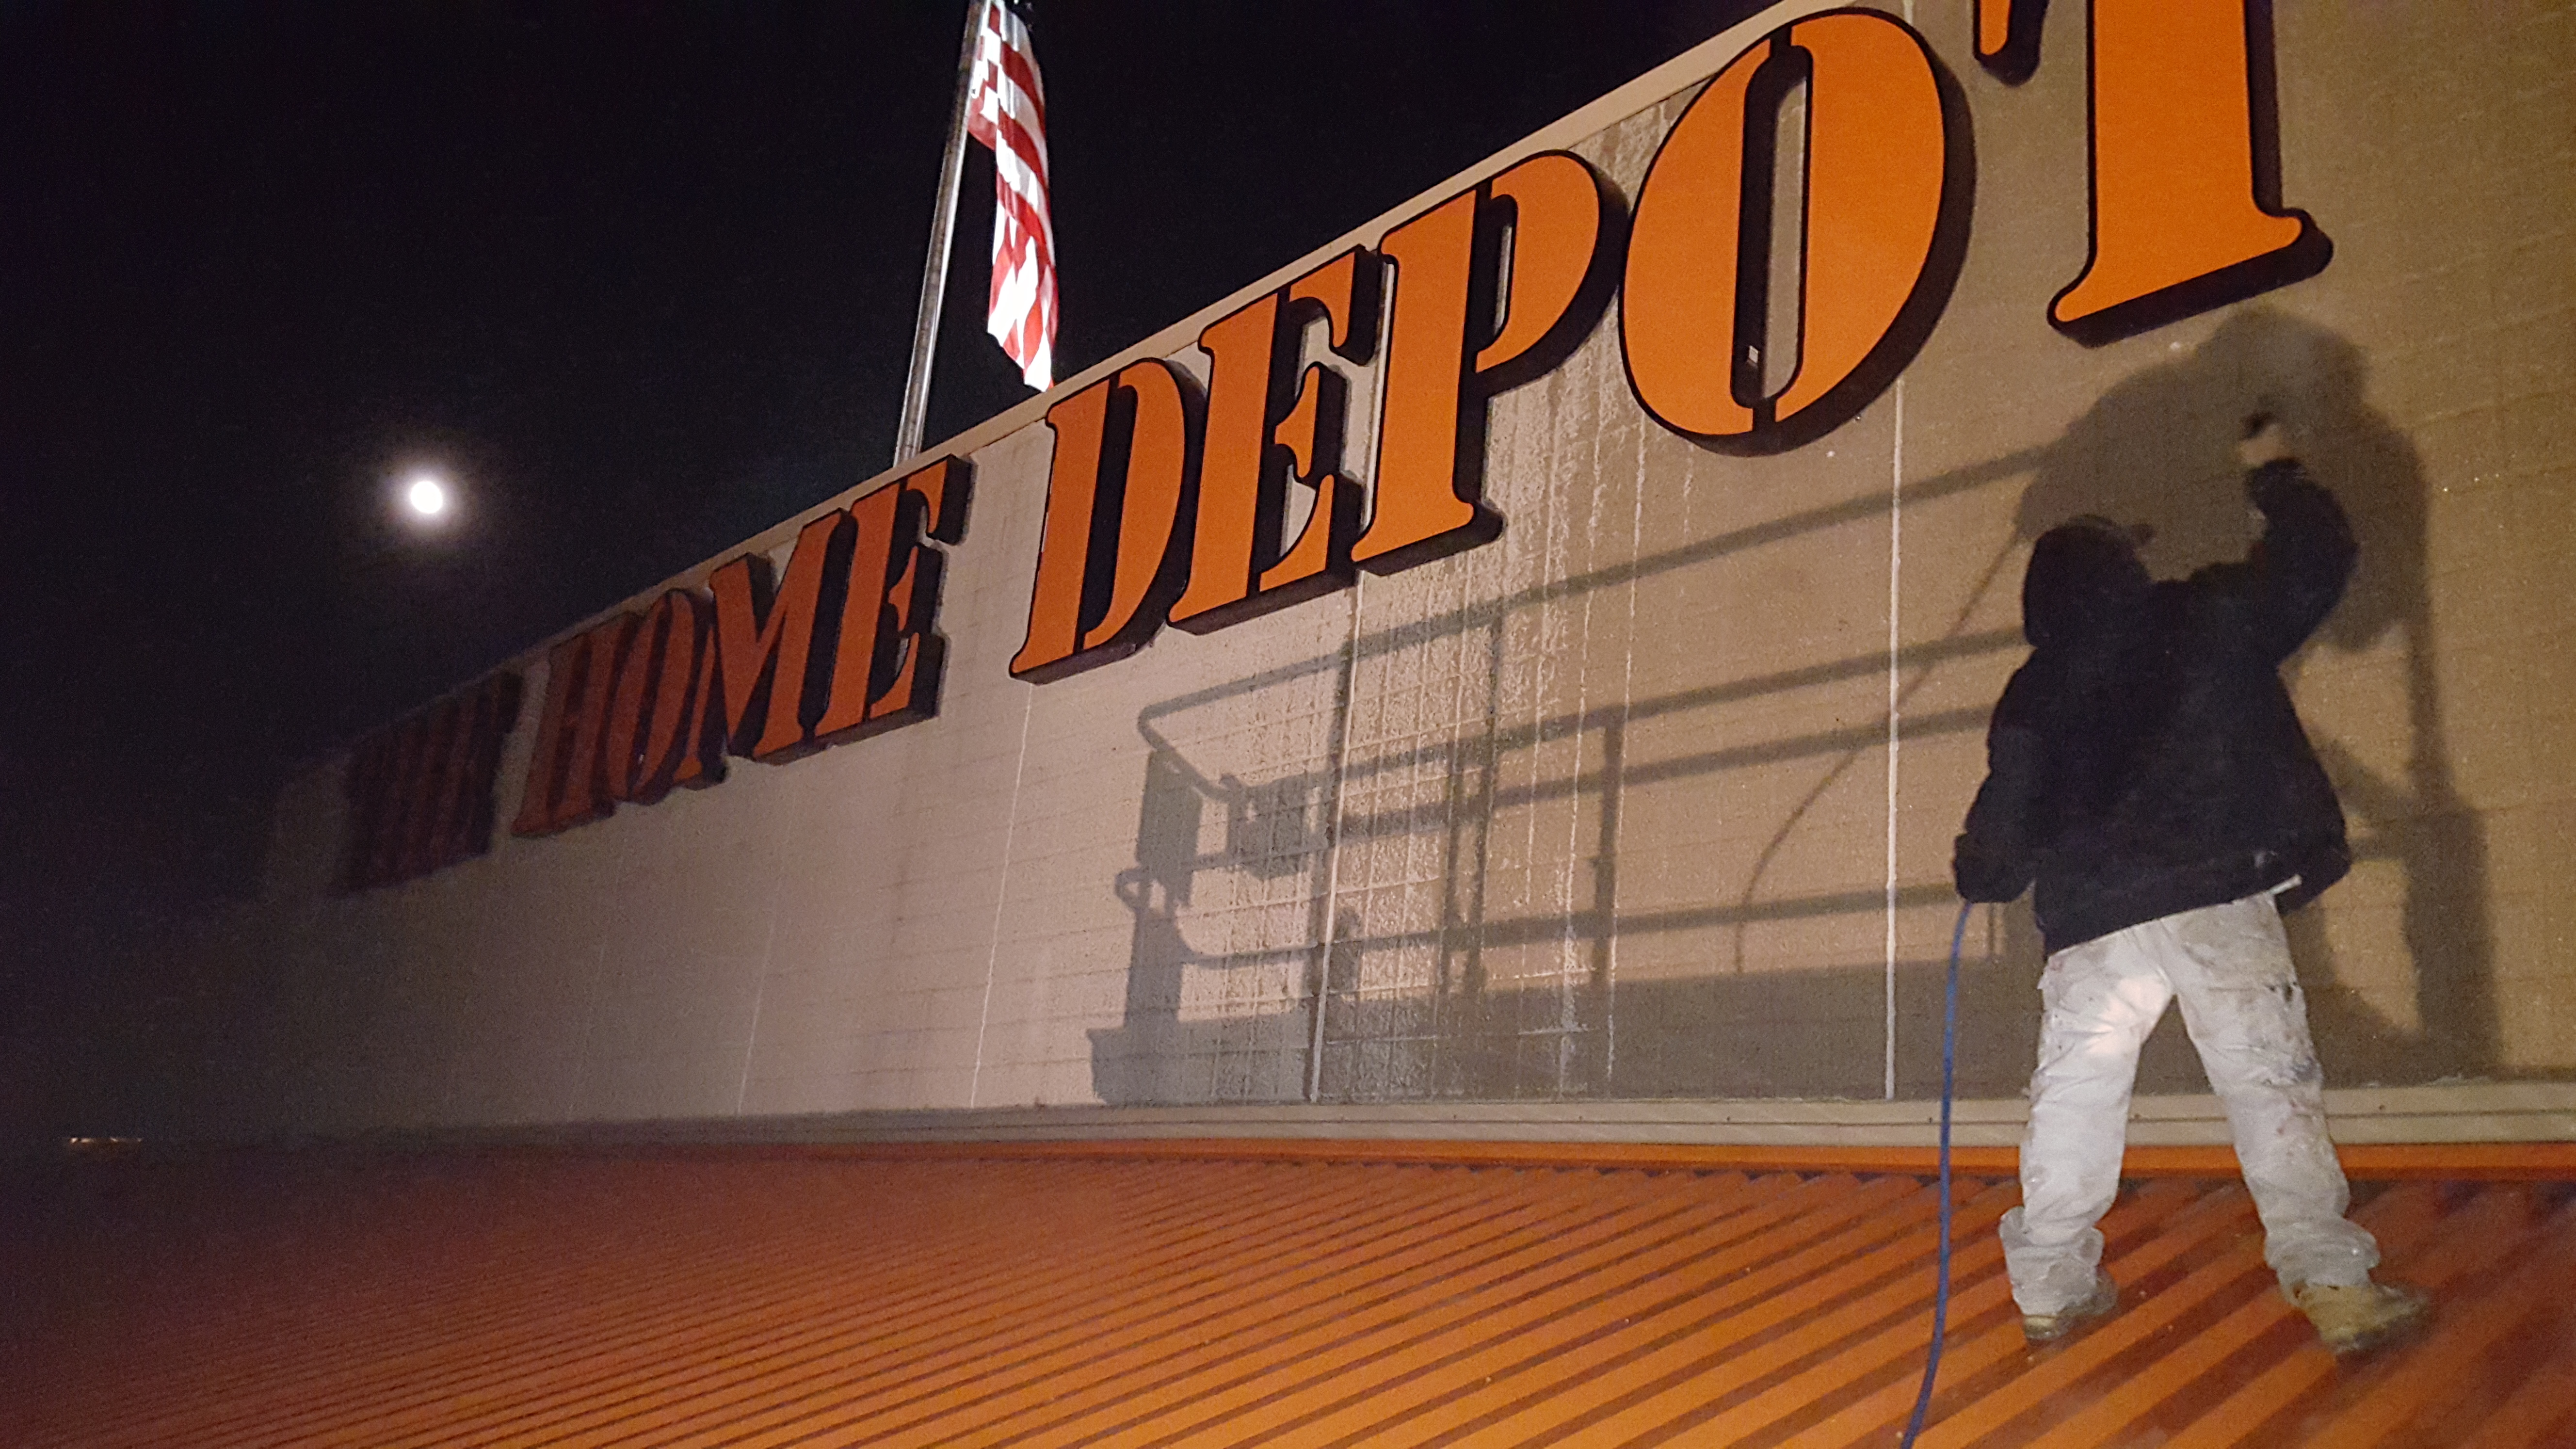 Home depot retail research project